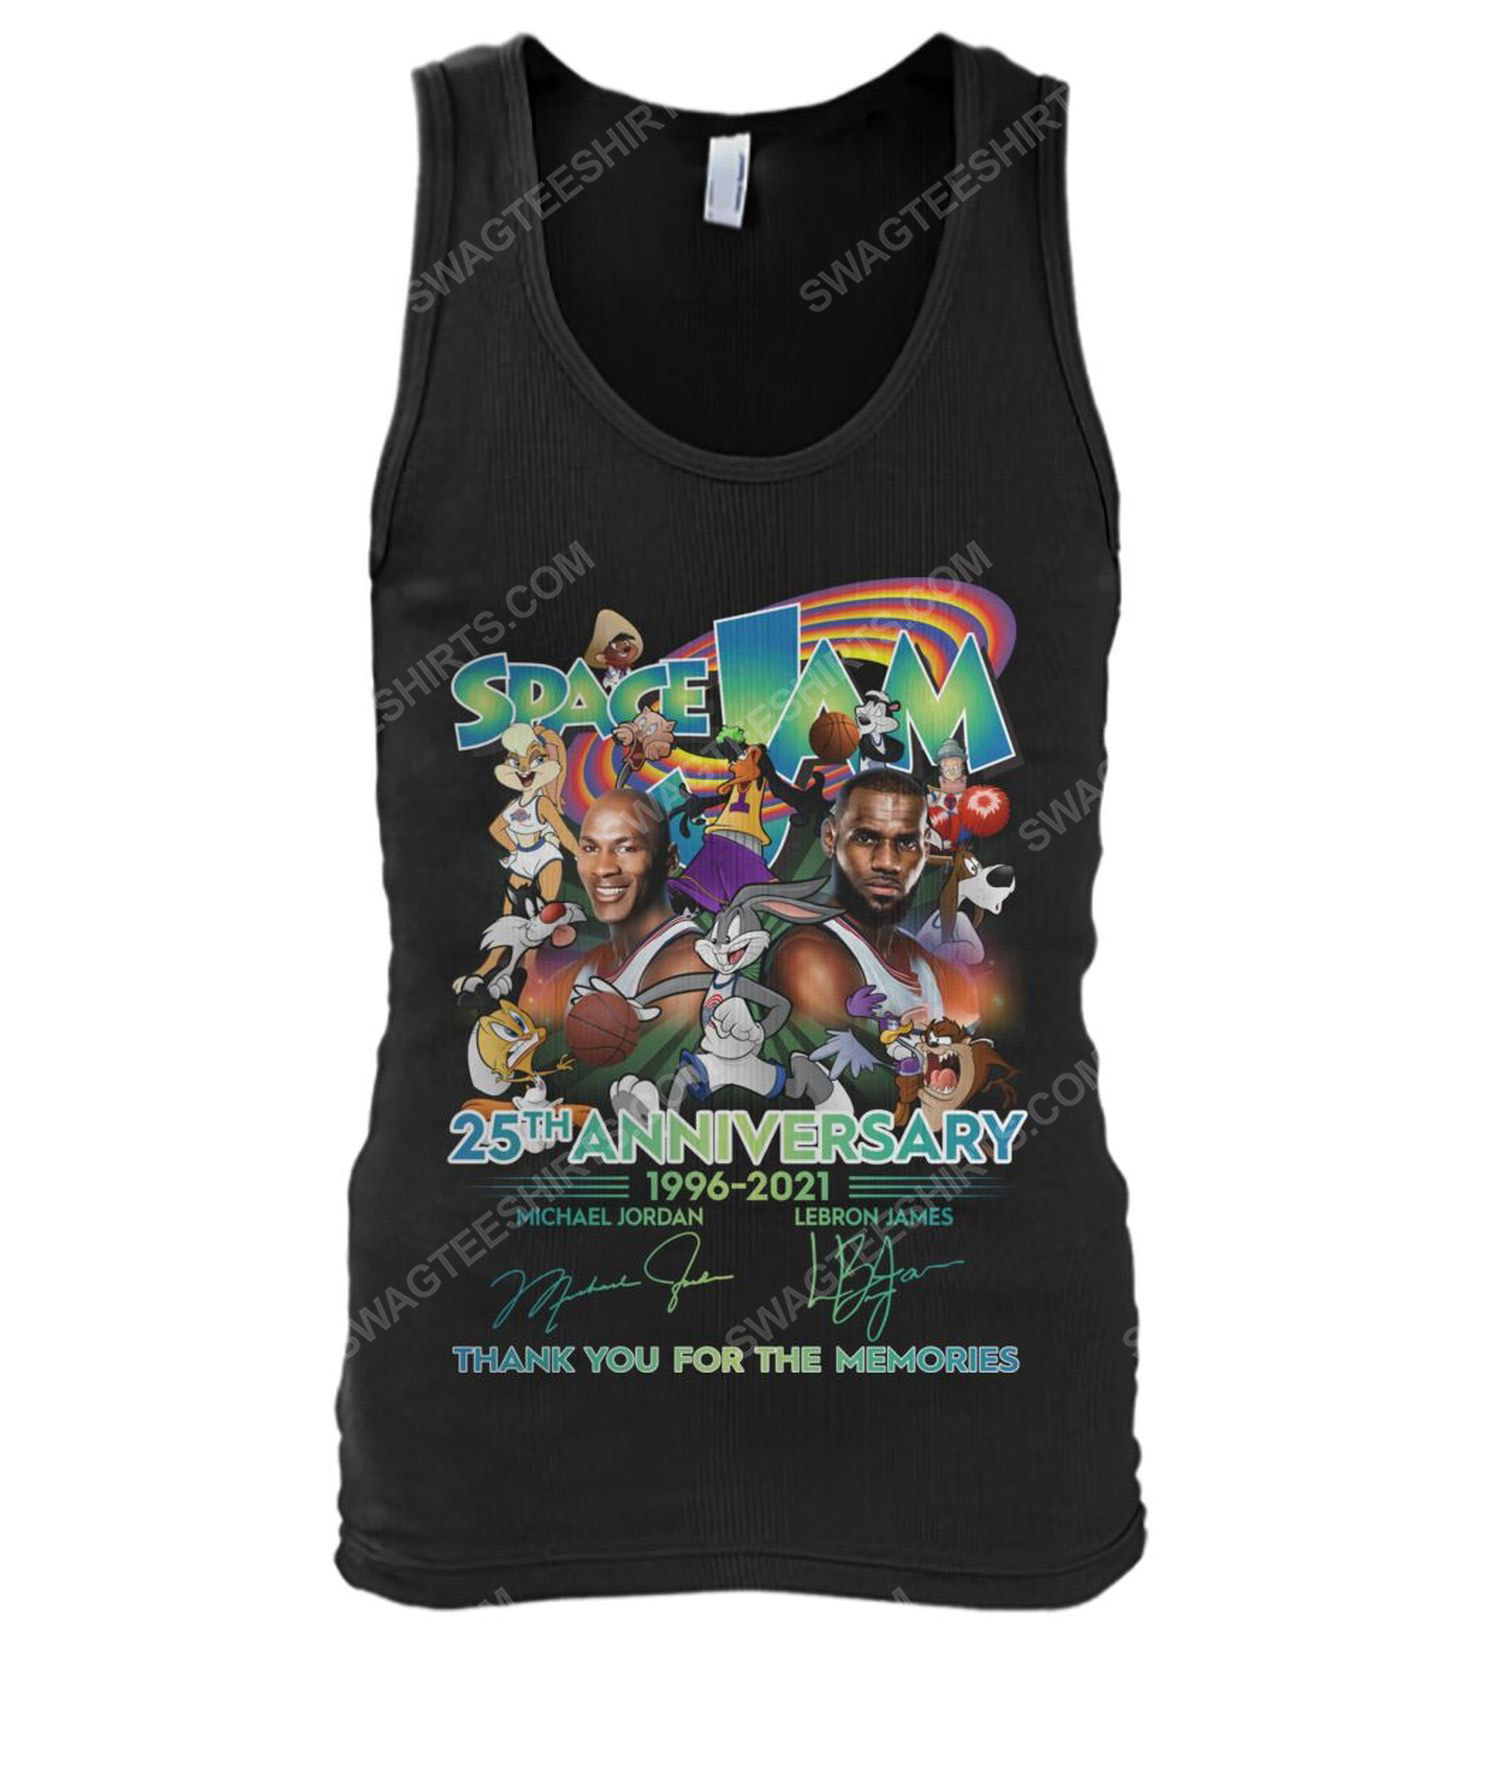 Space jam thank you for the memories tank top